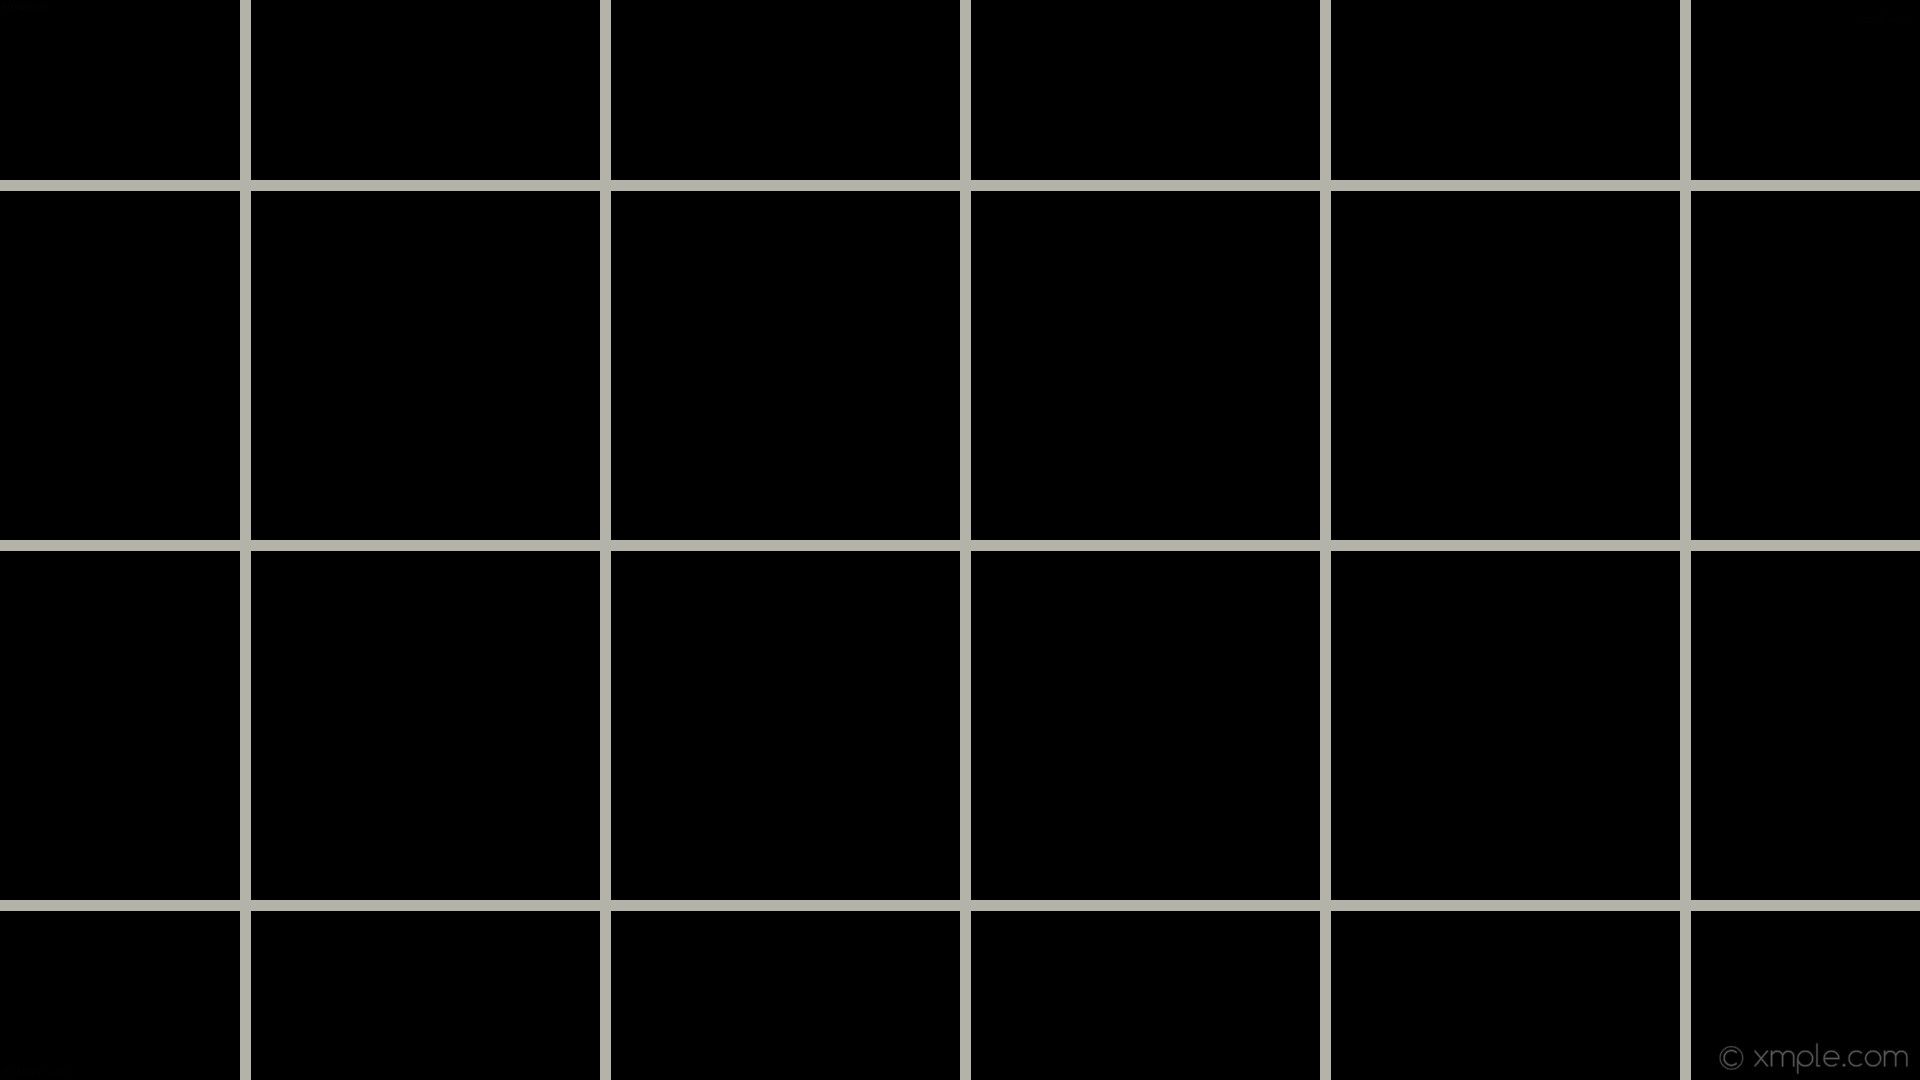 A black and white square tile pattern - Grid